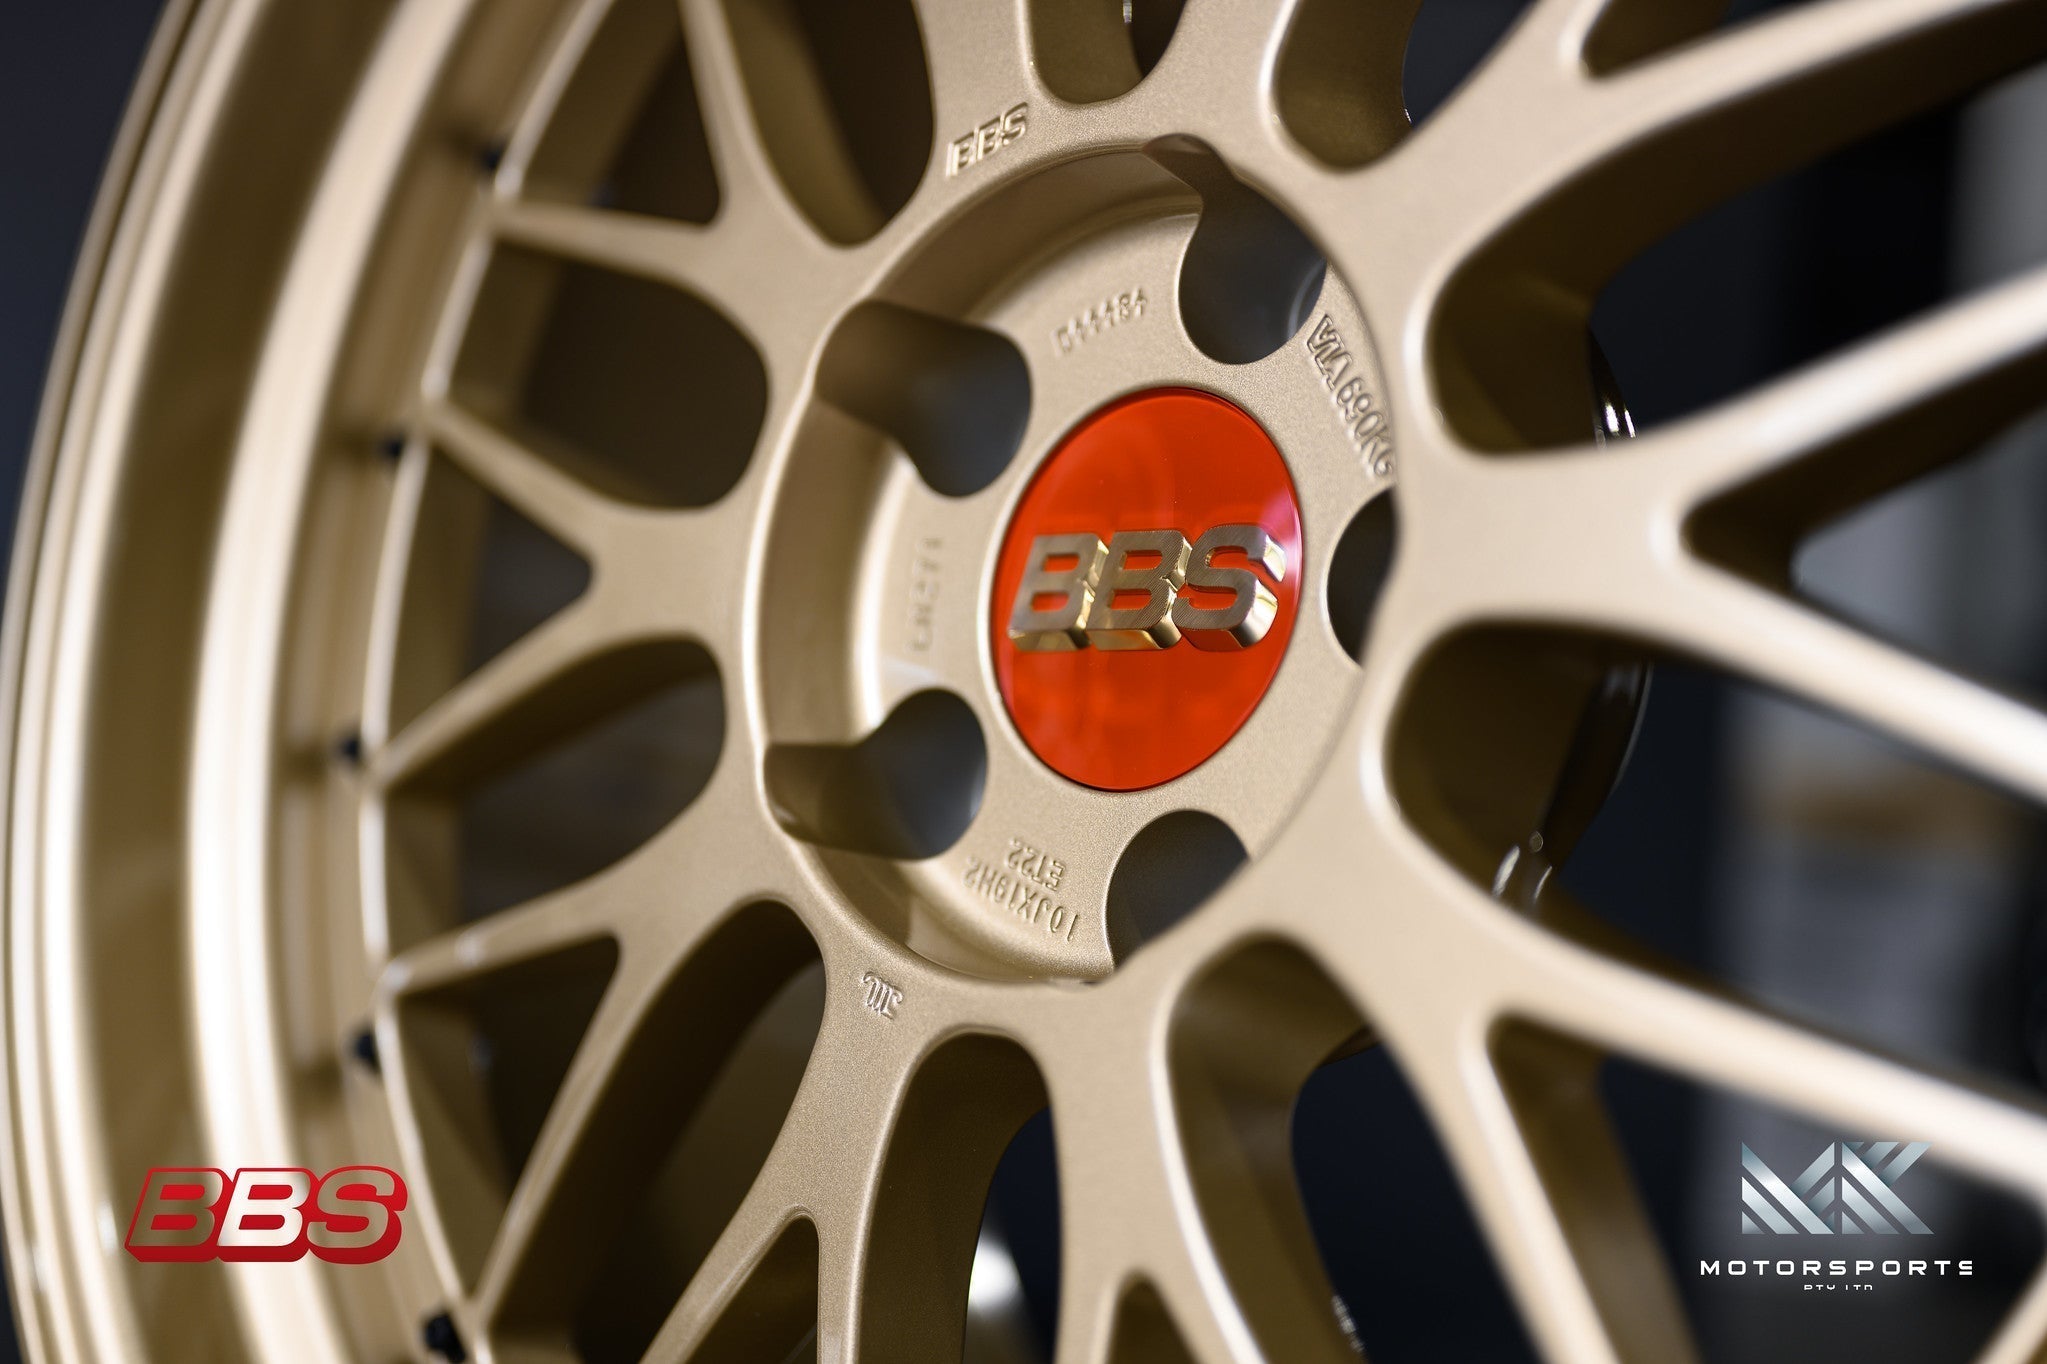 BBS LM F1 Championship Edition - Premium Wheels from BBS Japan - From just $8090.00! Shop now at MK MOTORSPORTS